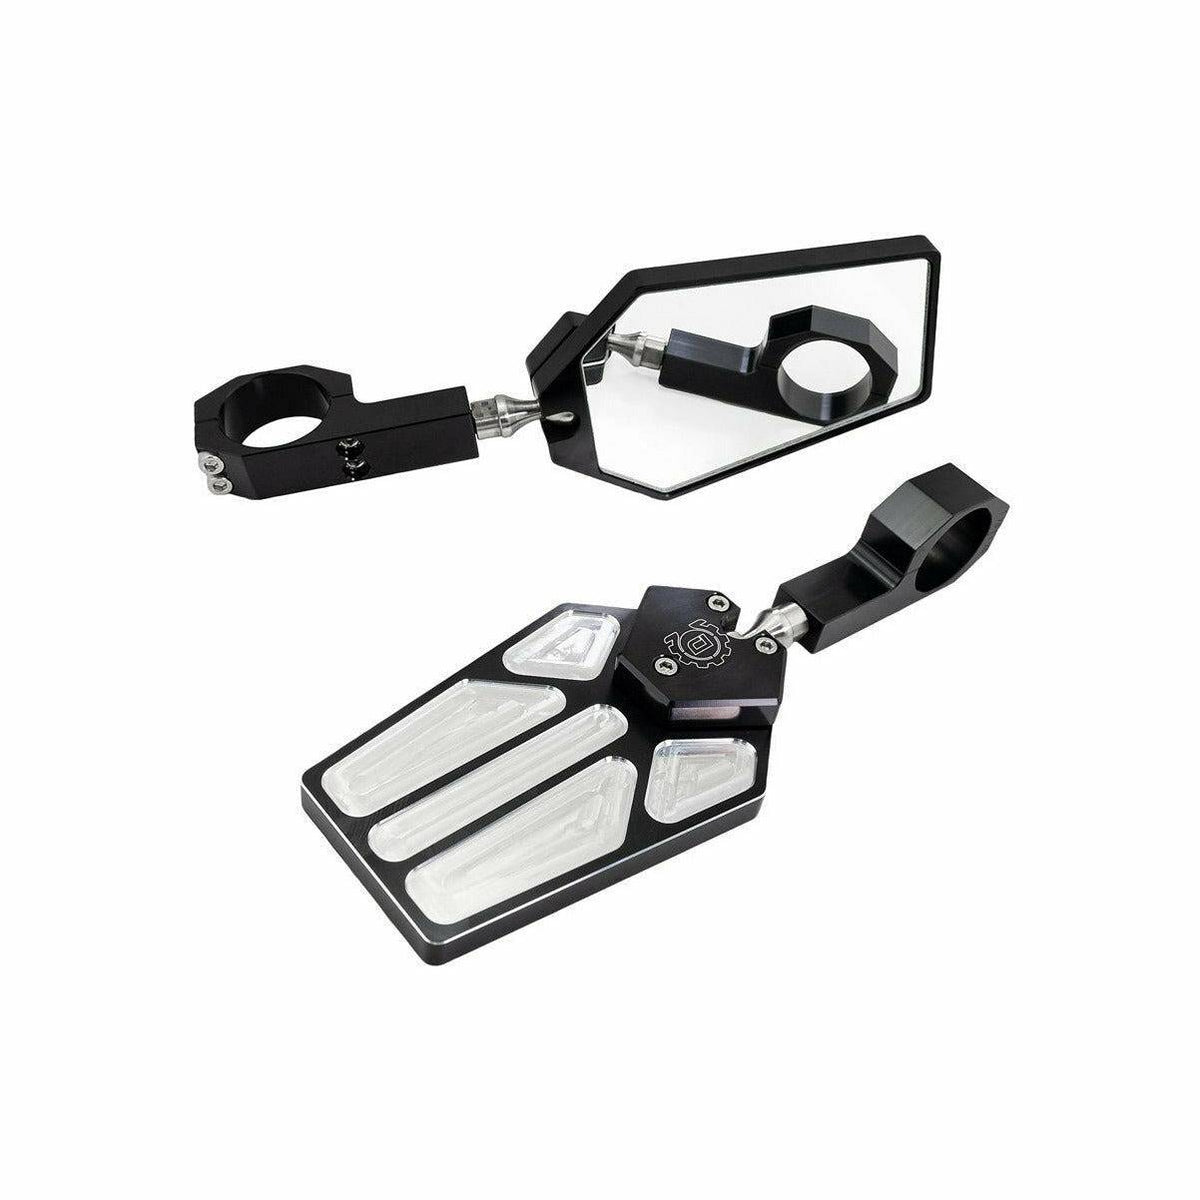 Deviant Billet Side Mirrors 1.75" Clamps